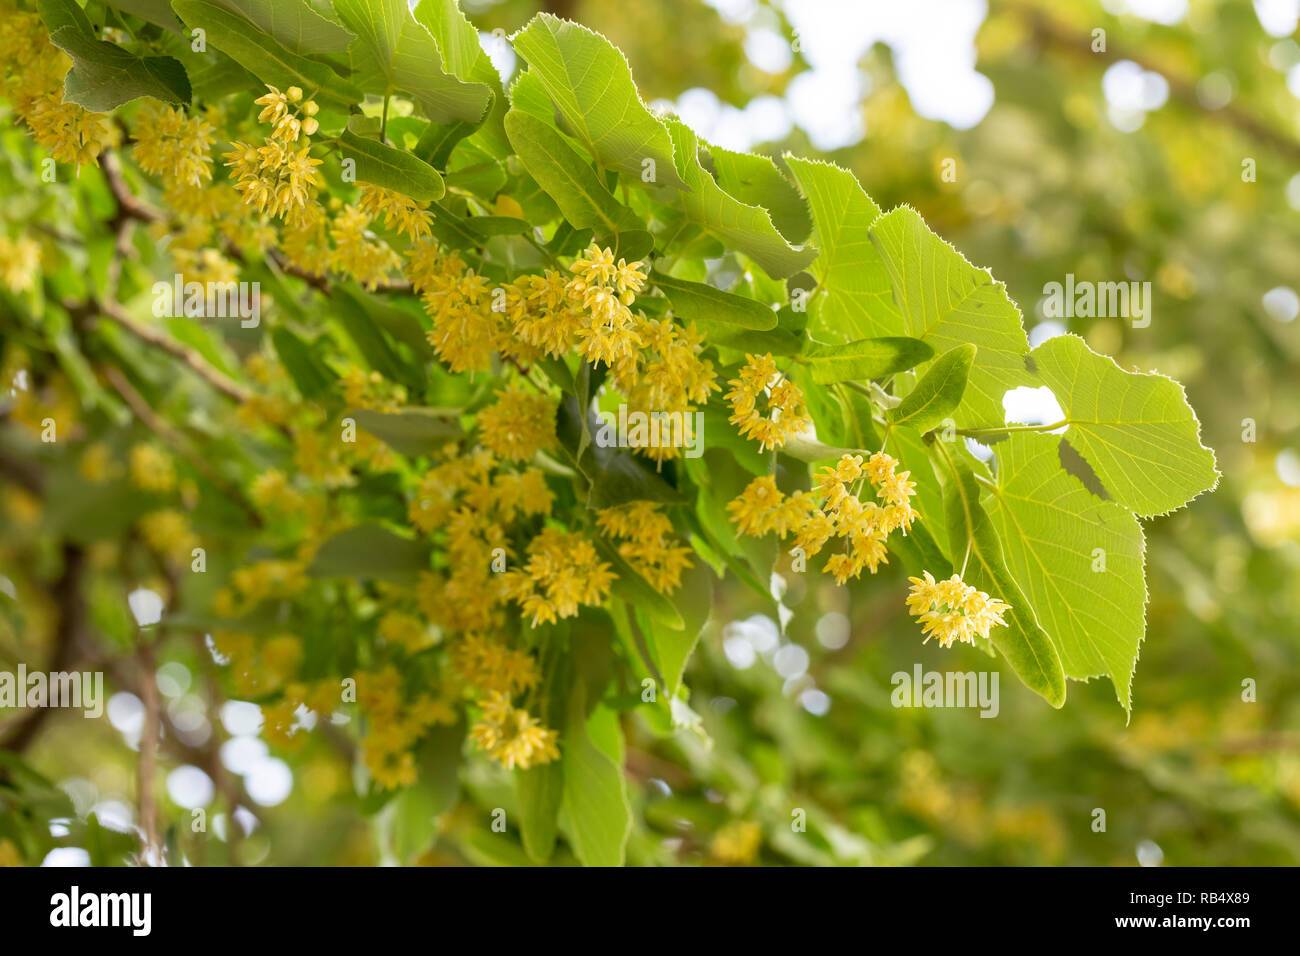 Beautiful linden branches with flowering buds close-up. Stock Photo